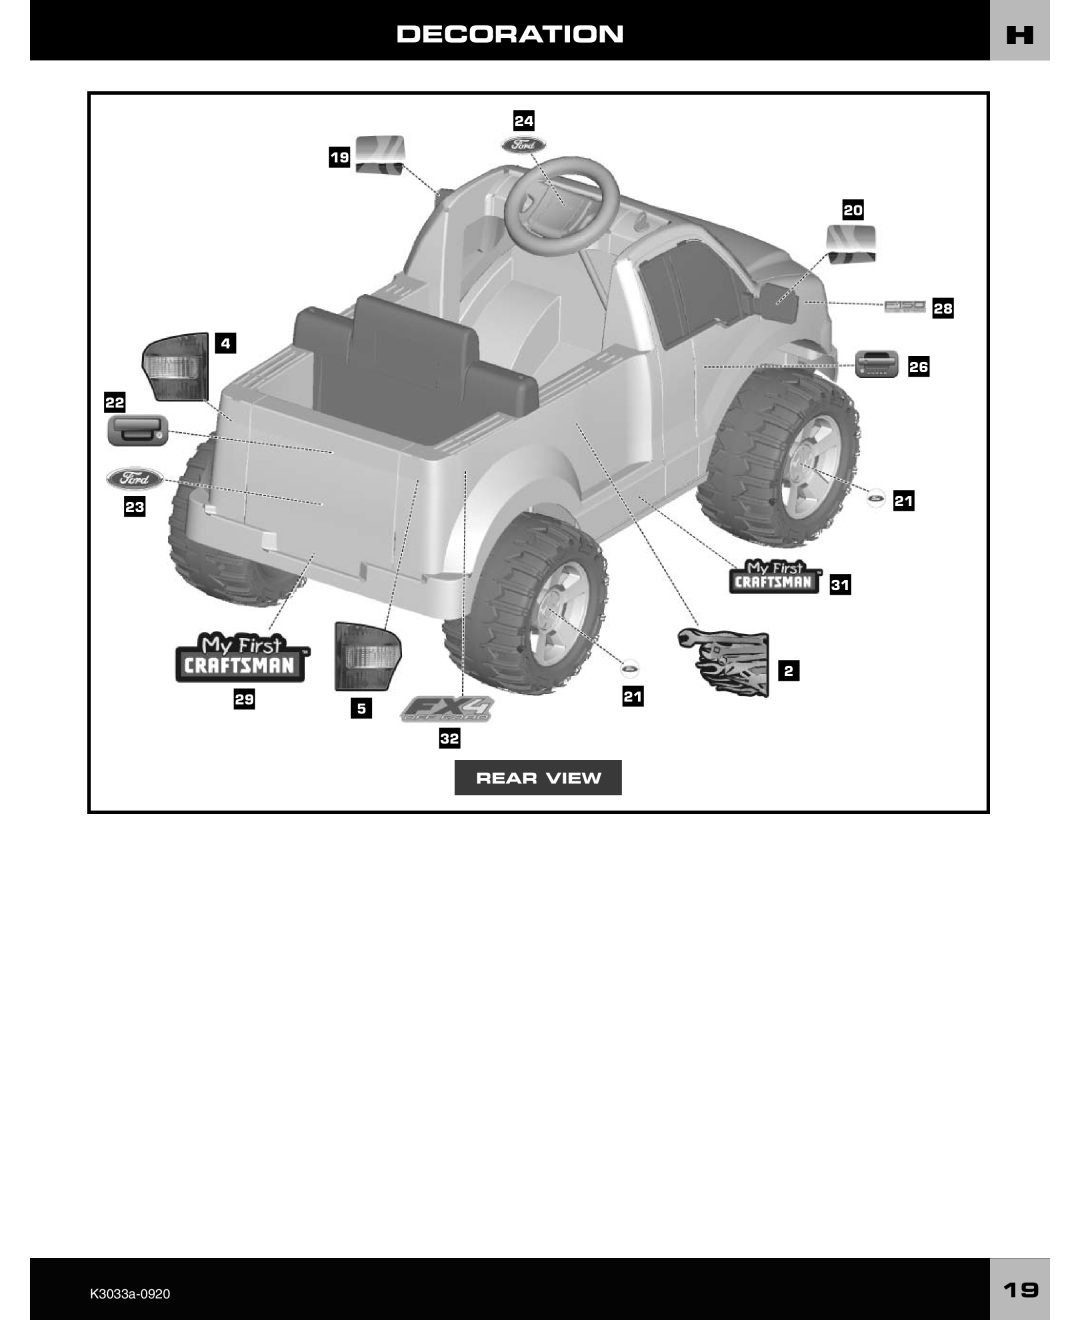 Ford F-150 owner manual Decorationh, Rear View, K3033a-0920 